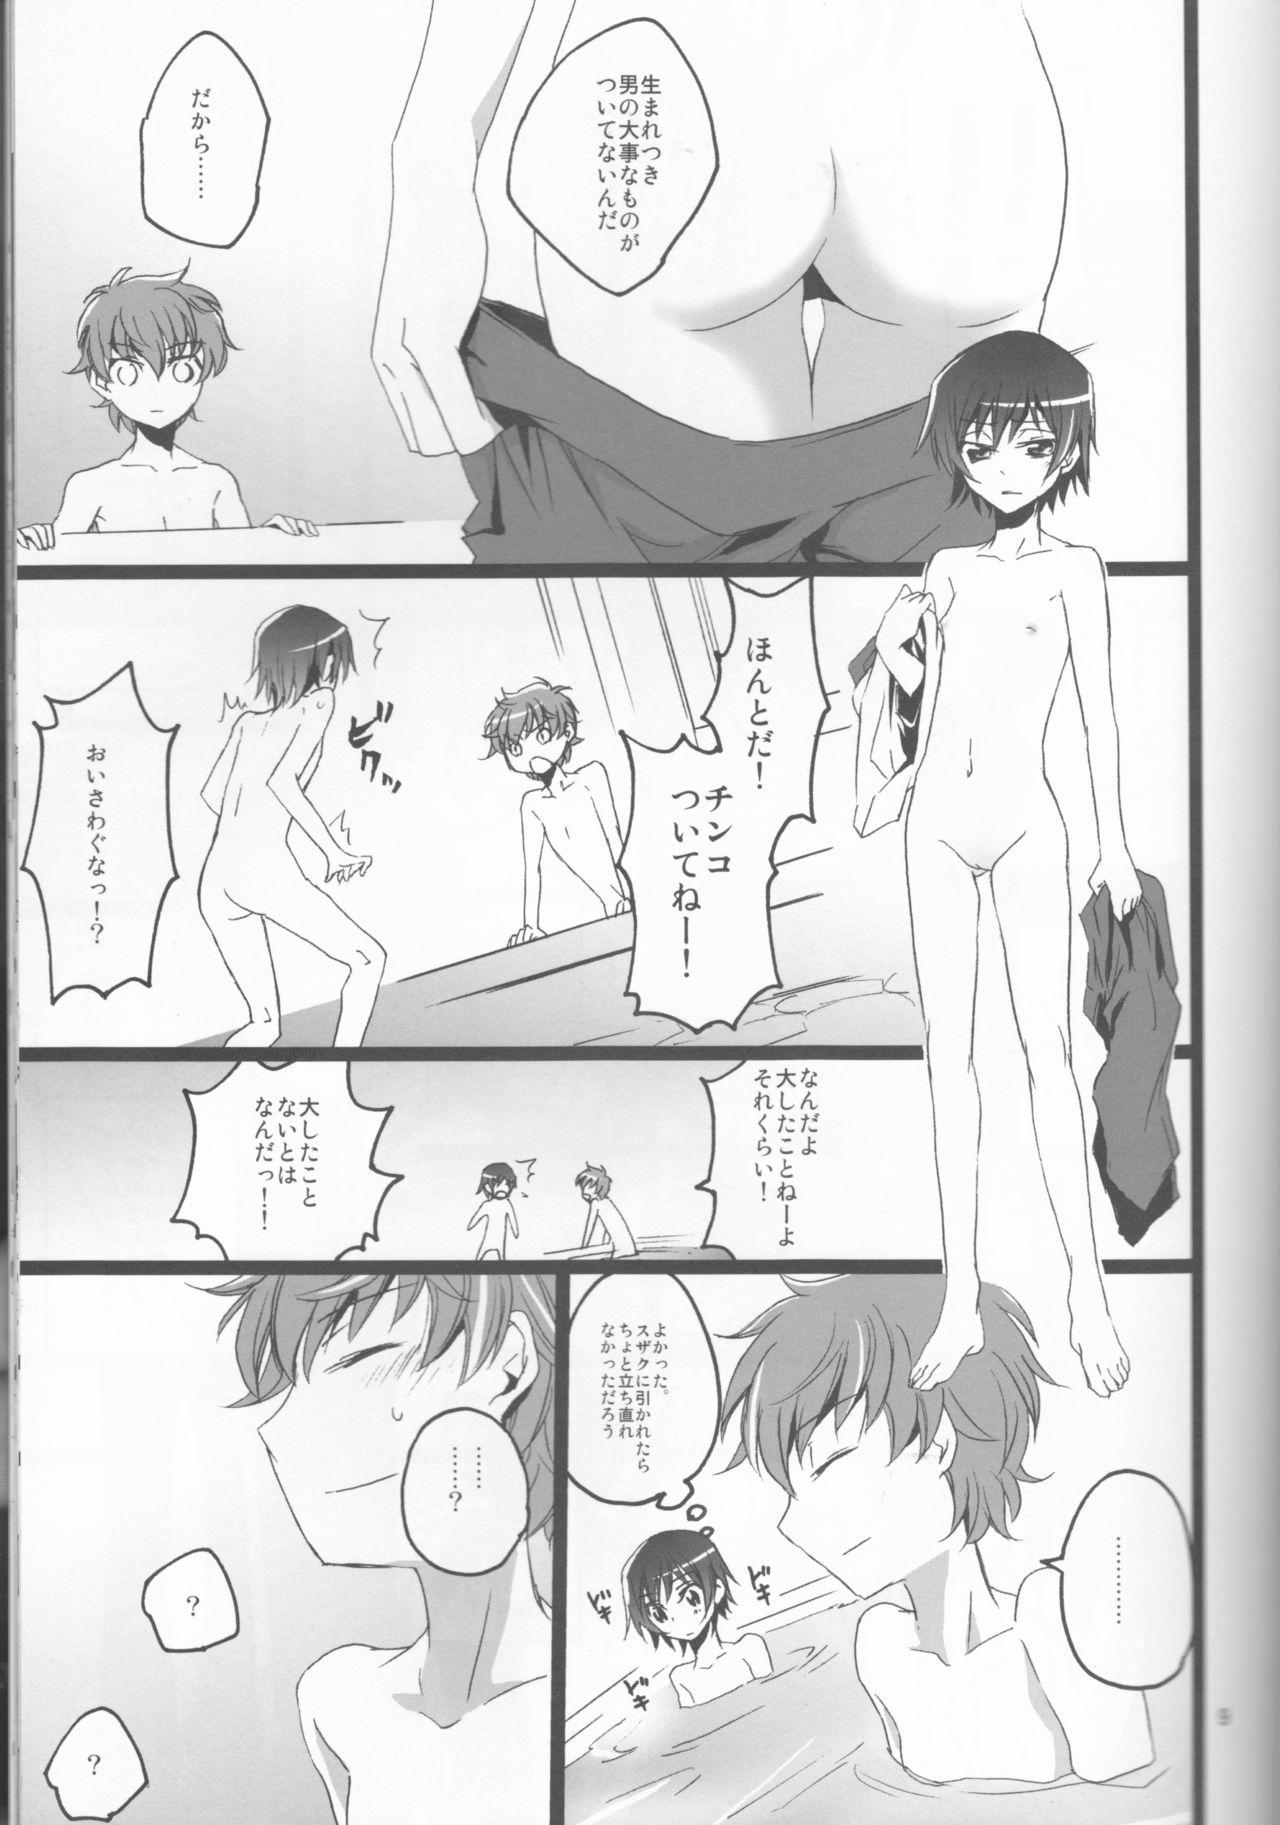 Pale Chameleon Girl - Code geass Gay Shorthair - Page 9